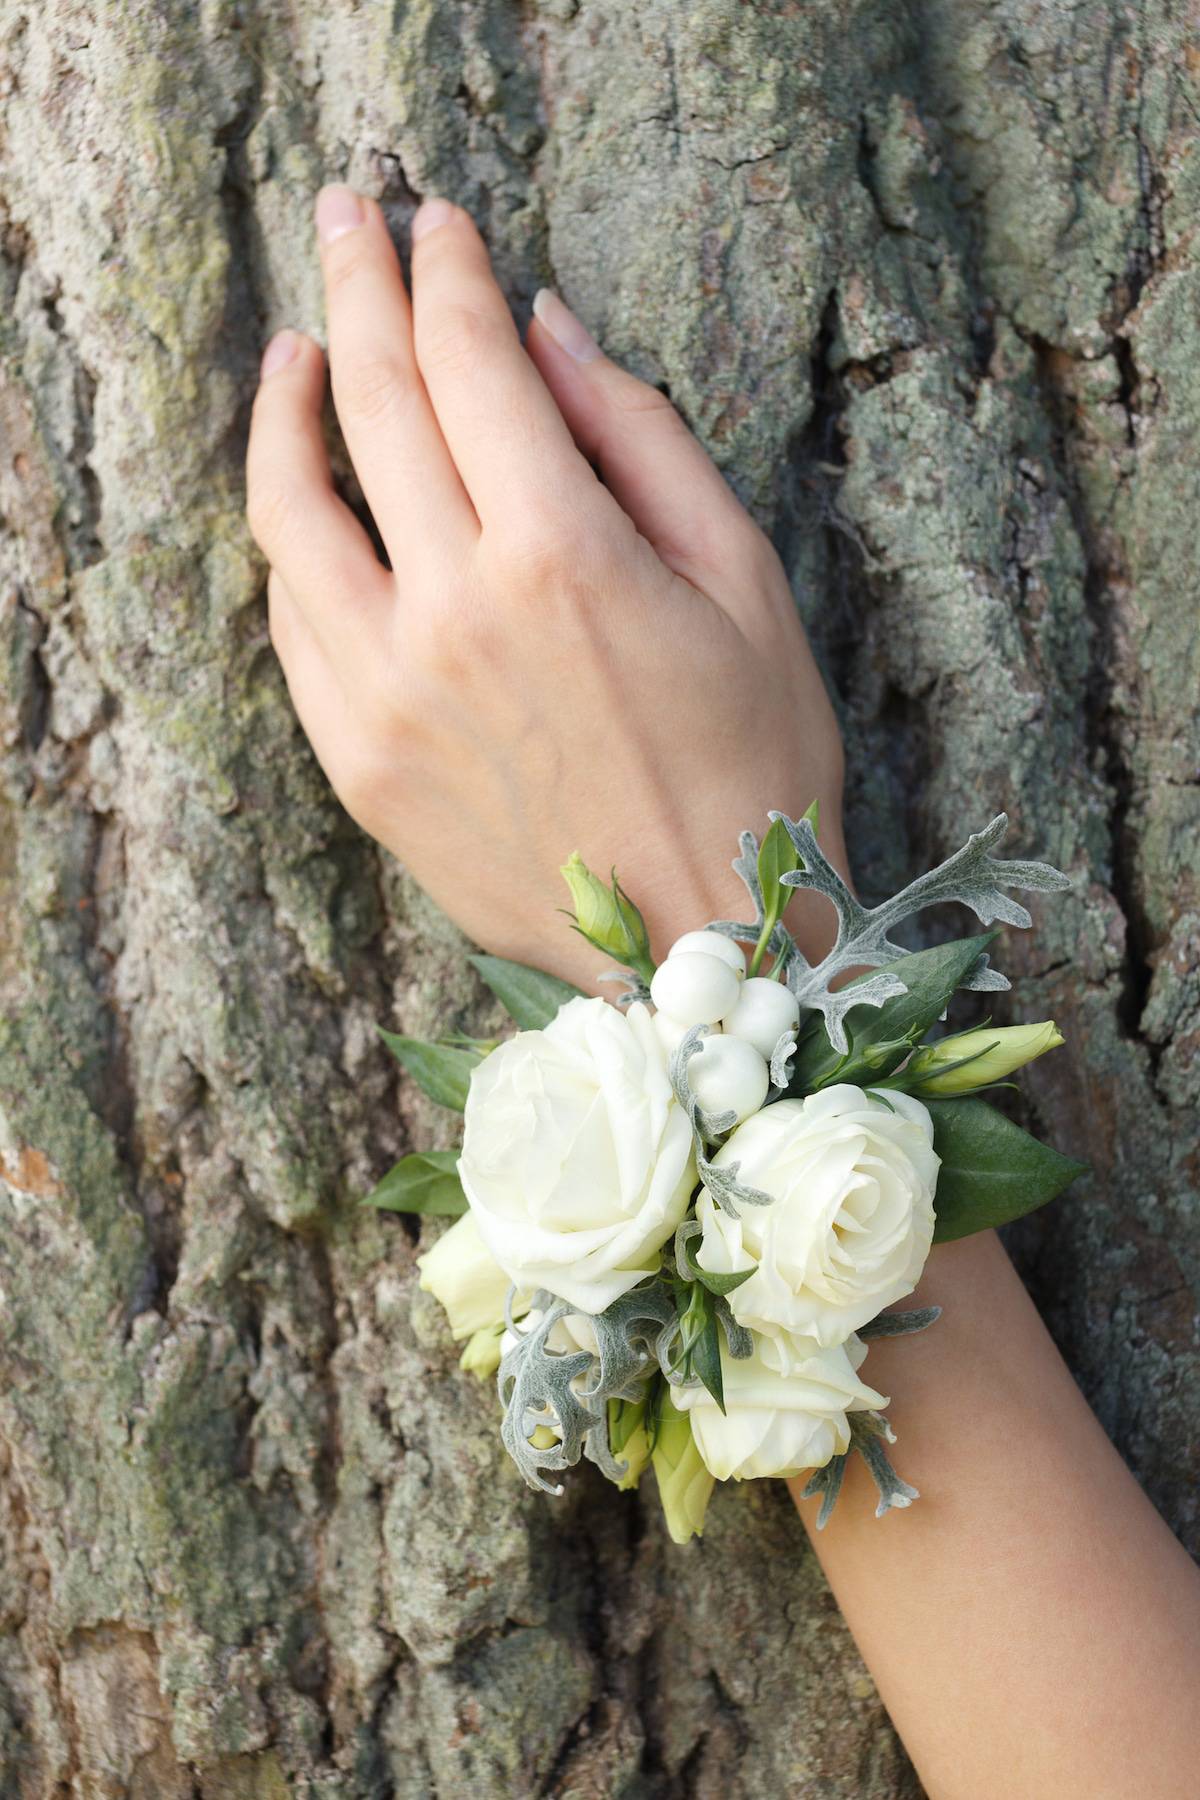 White and green wrist corsage on a hand